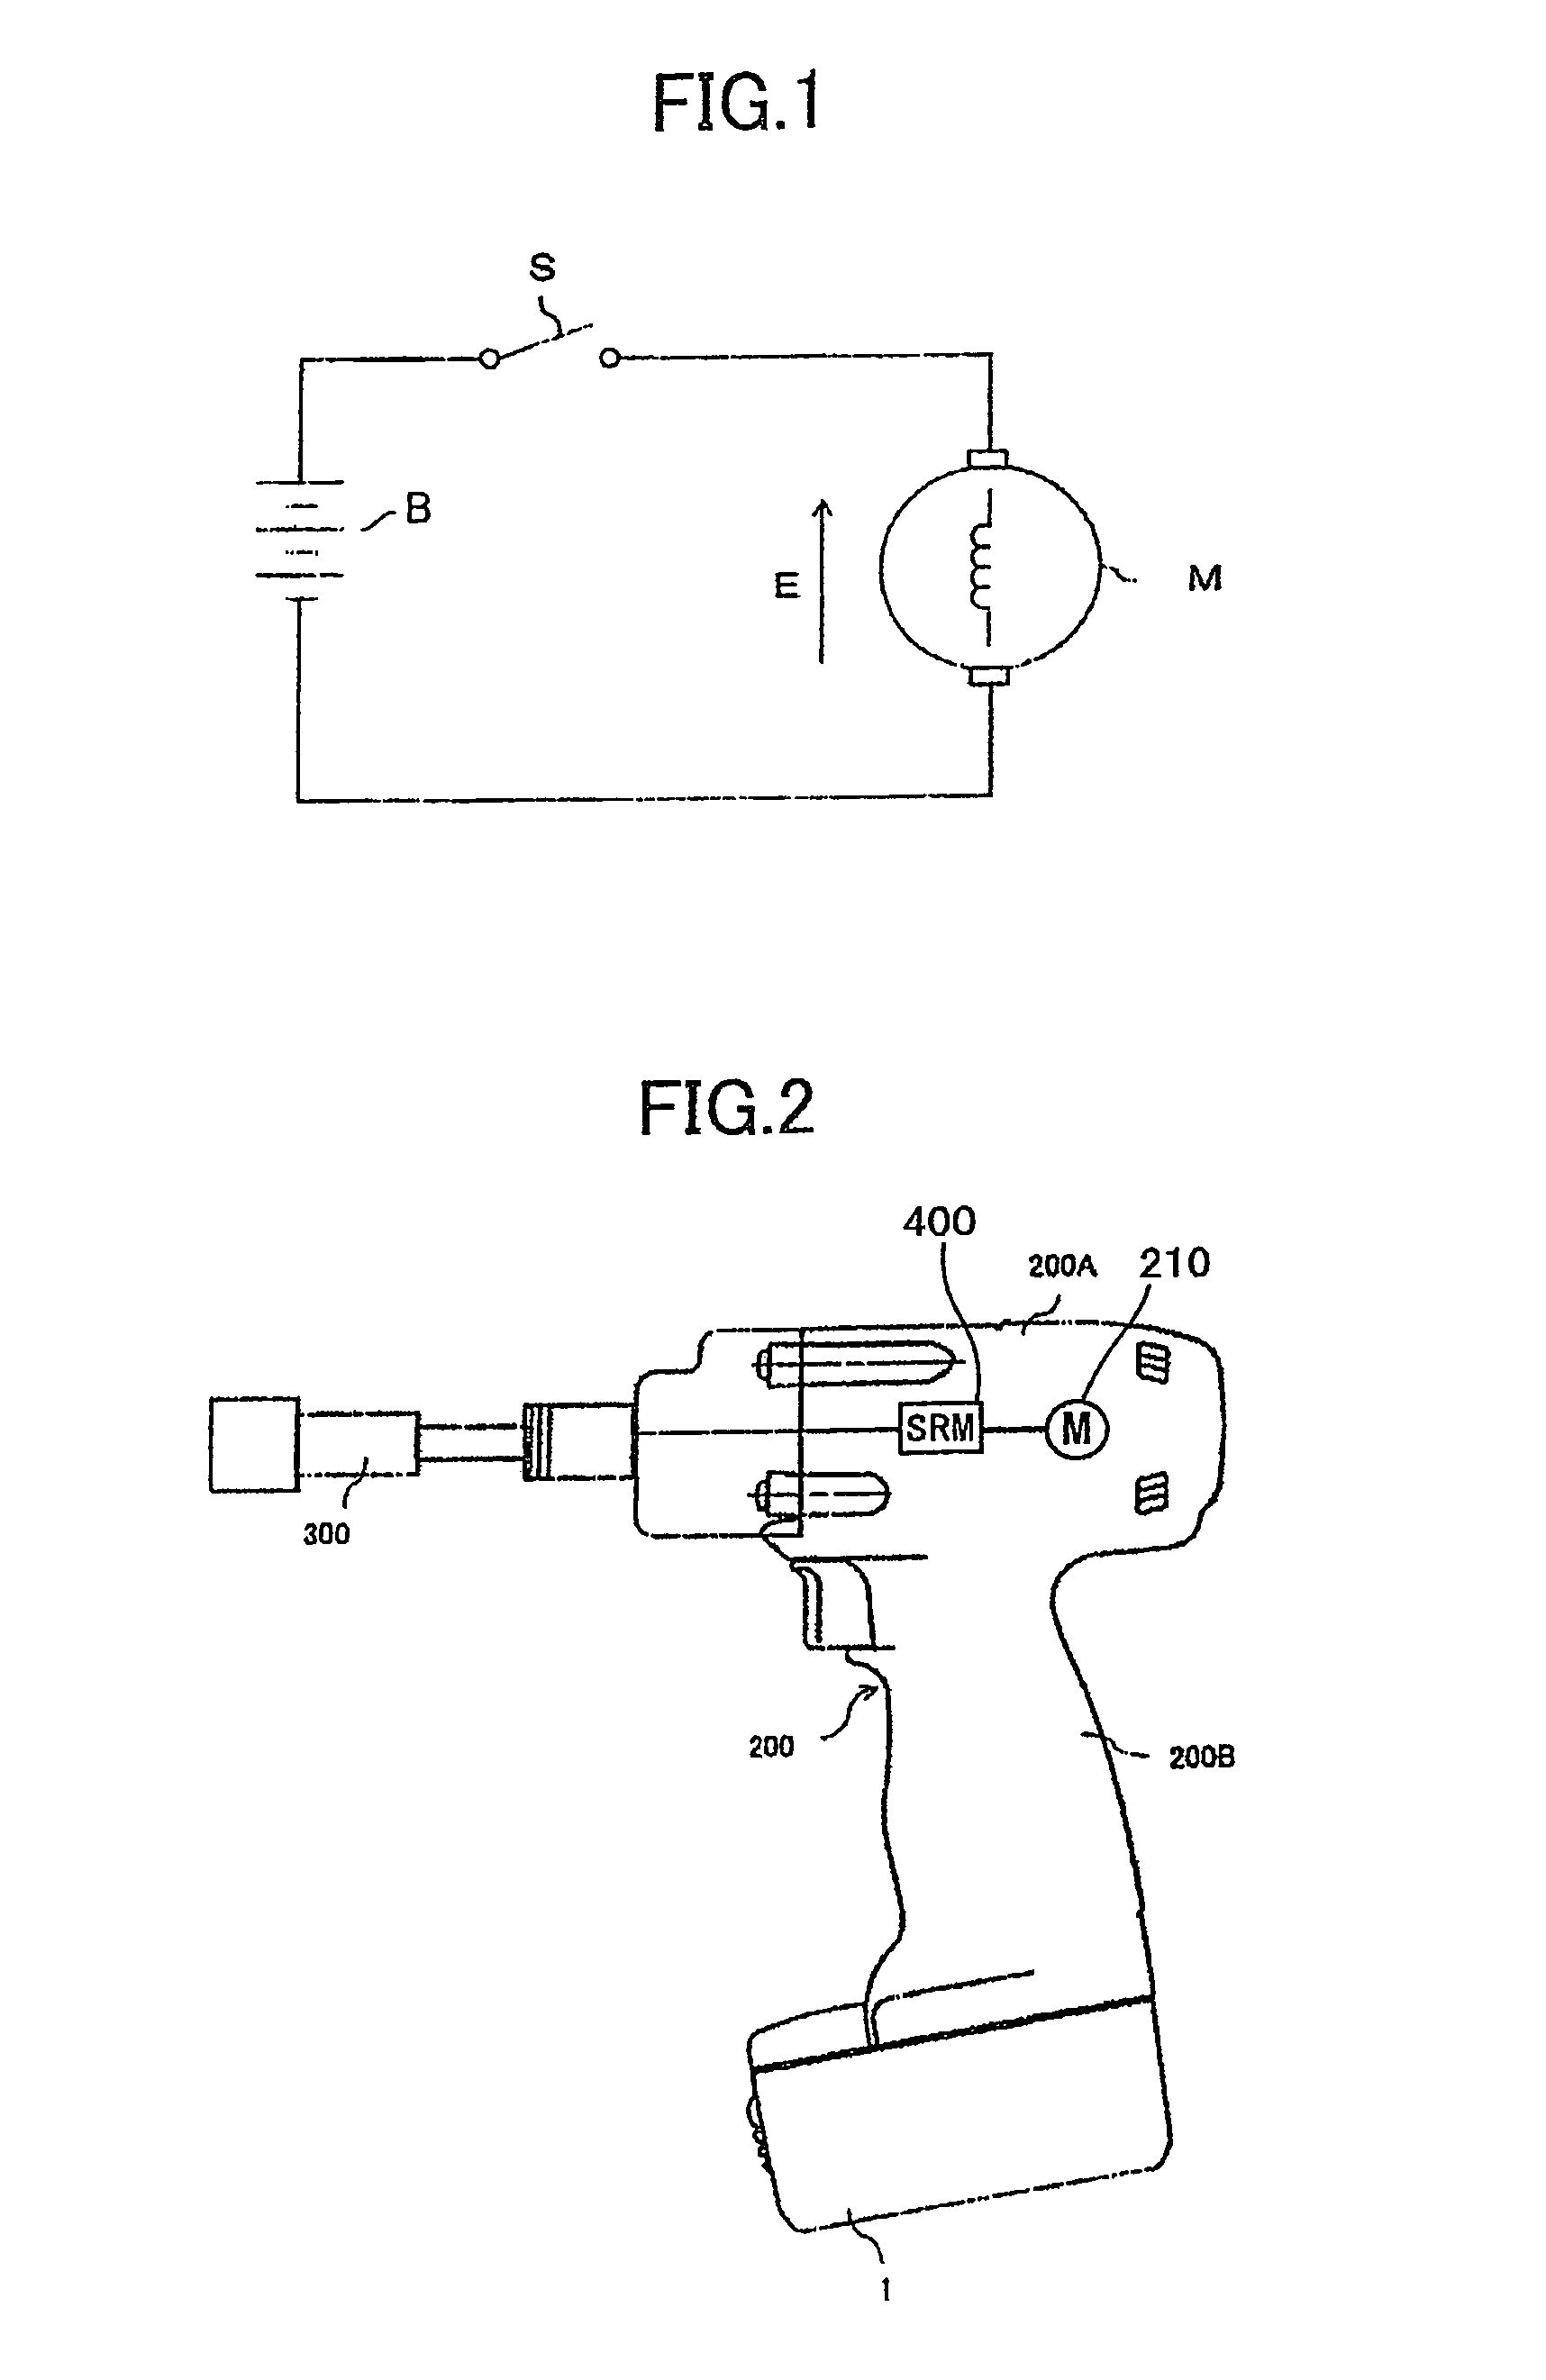 Cordless power tool with overcurrent protection circuit permitting the overcurrent condition during specified time periods